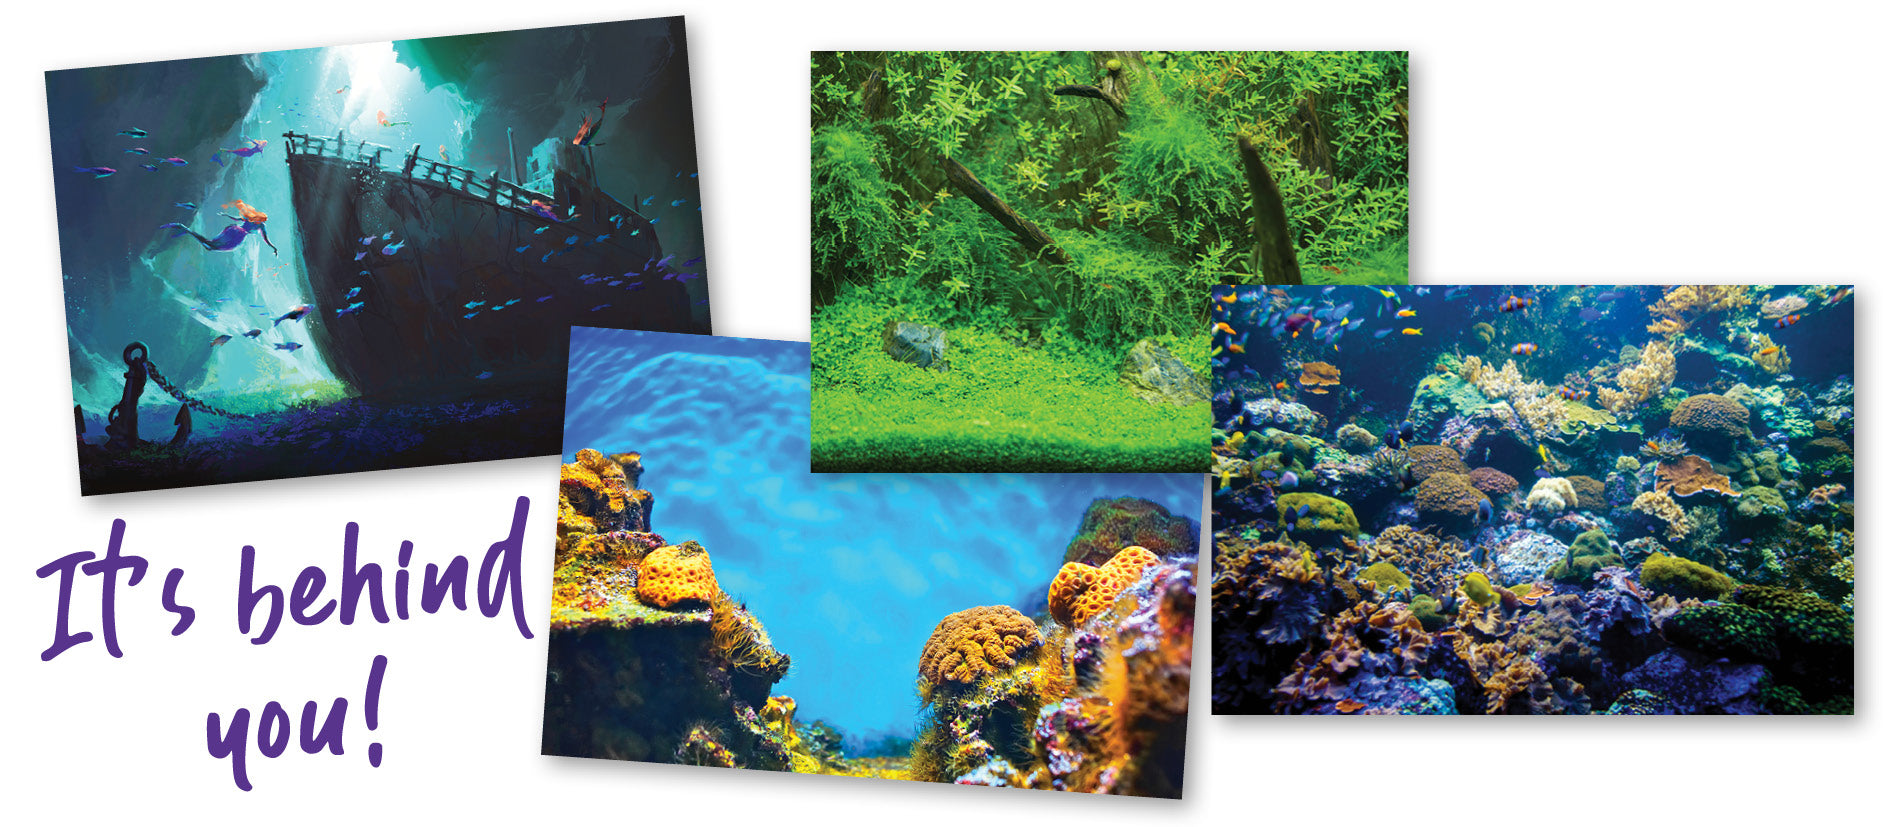 printed out fish tank backgrounds for decorating a tank